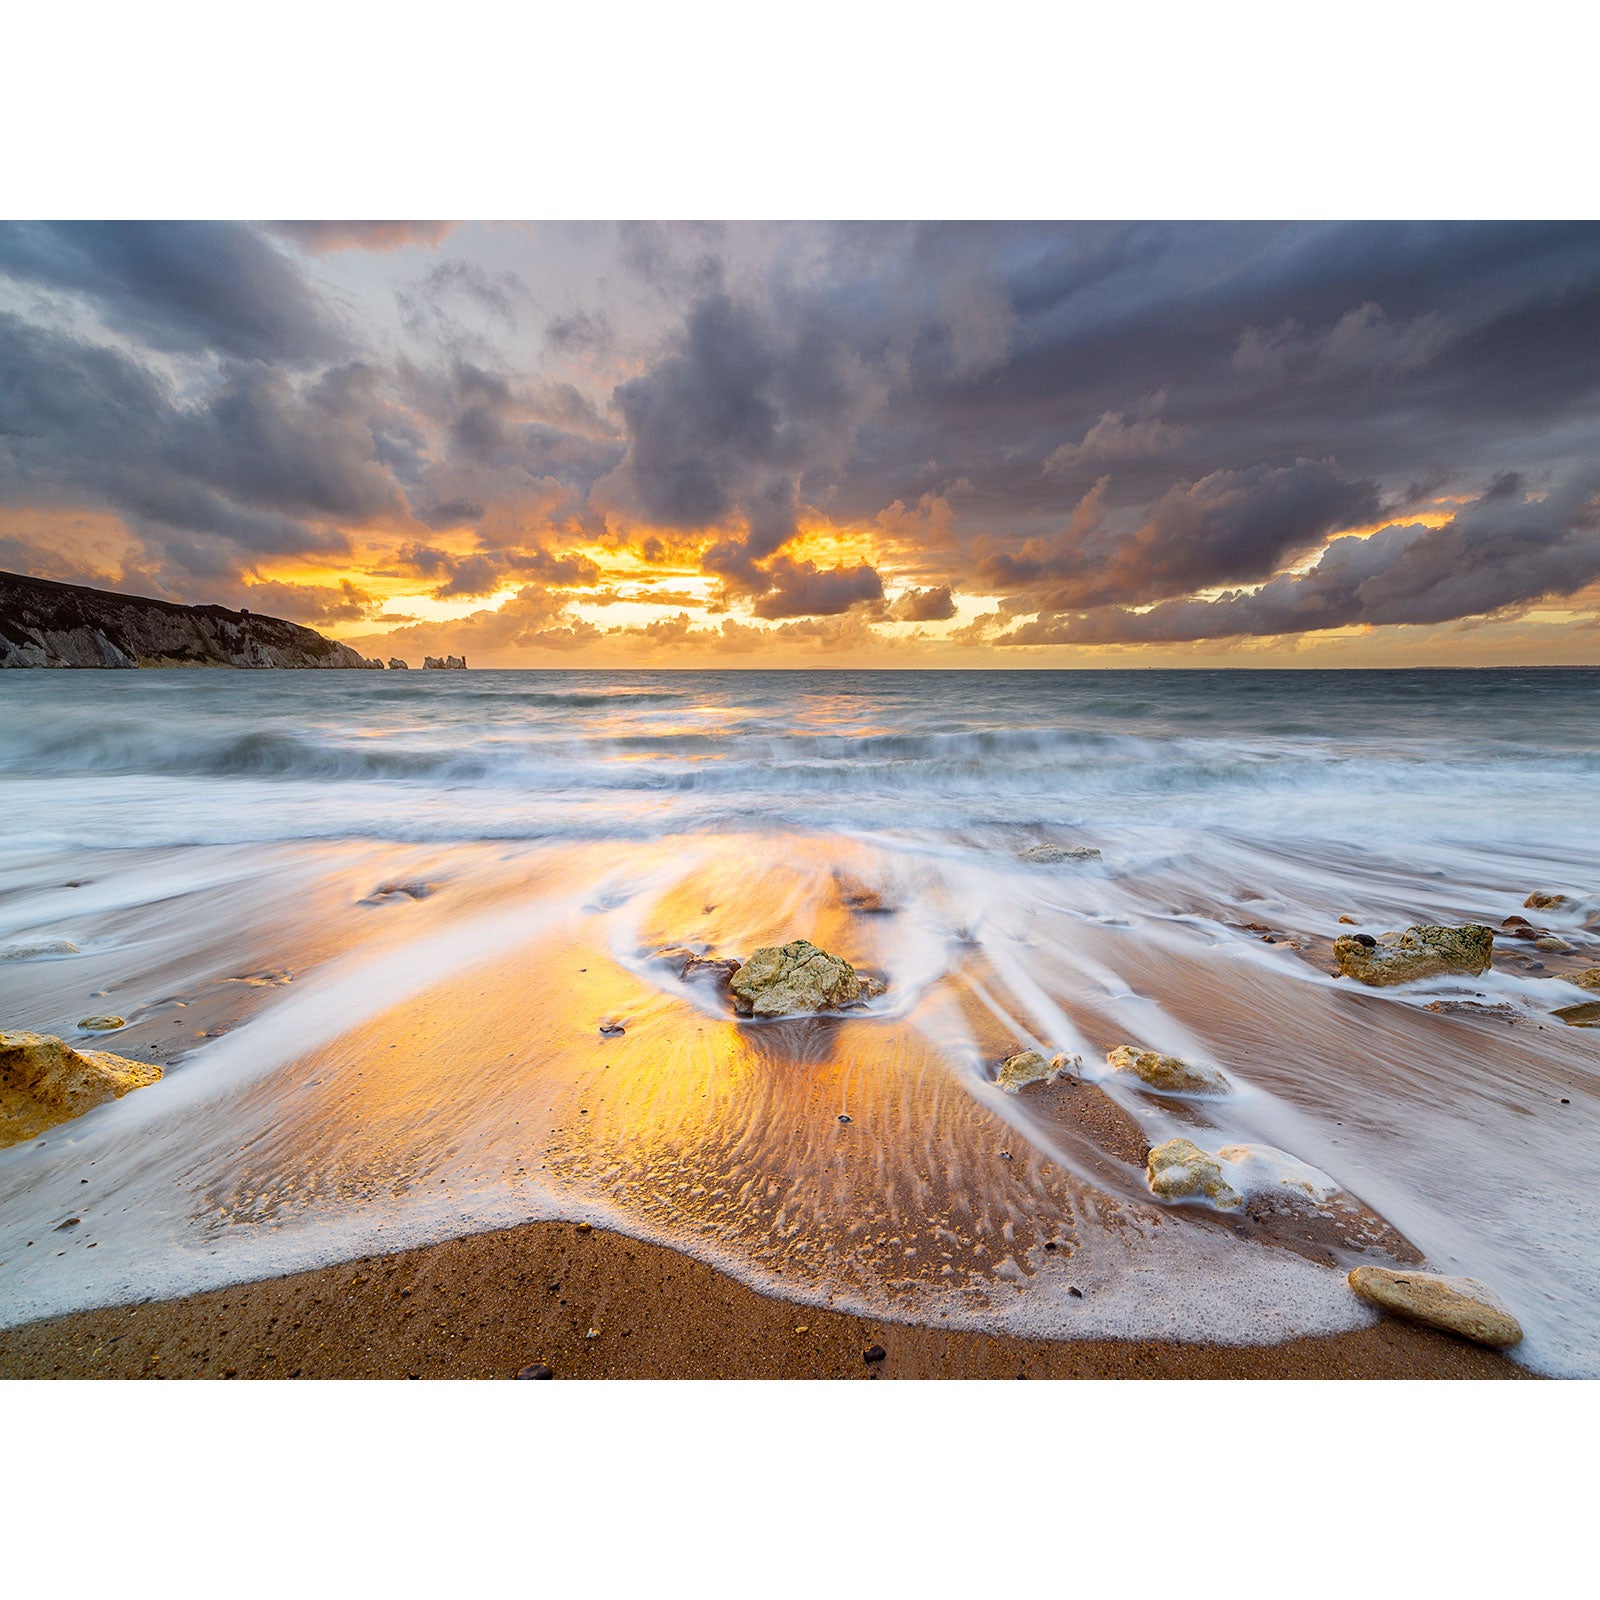 Sunset over a turbulent sea with waves washing onto a sandy beach with rocks, under a dramatic cloud-filled sky on the Isle of Wight captured by Alum Bay and The Needles from Available Light Photography.